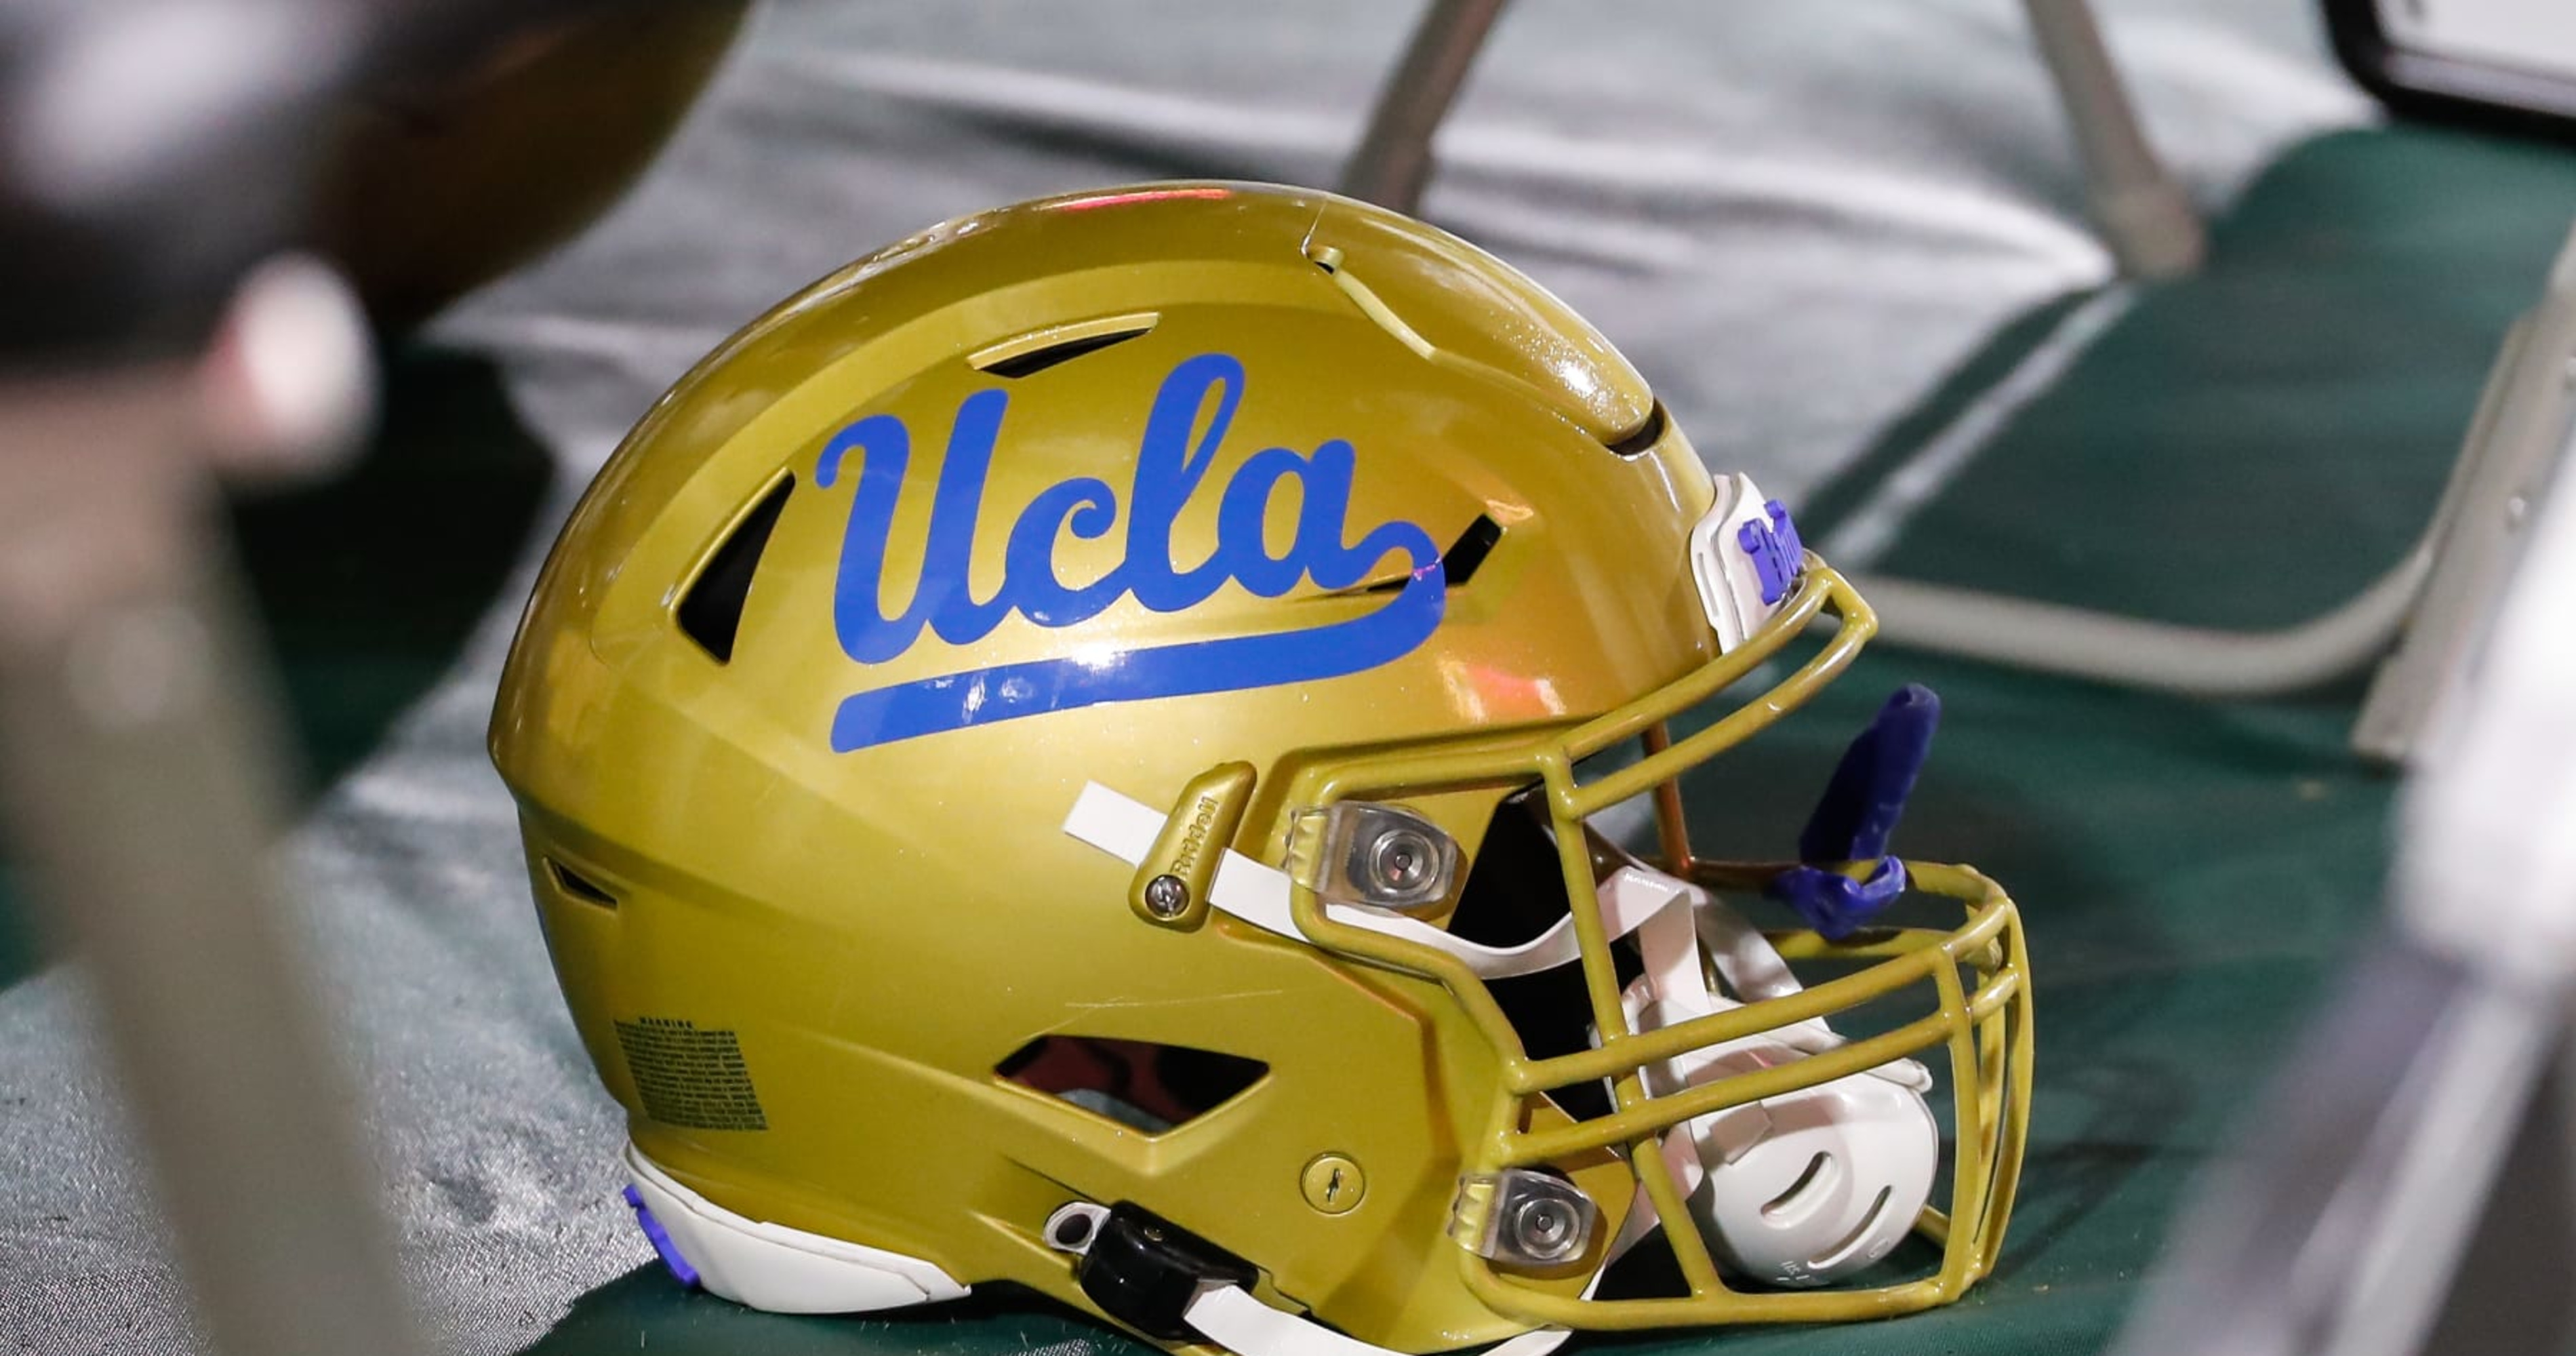 UC Regent on UCLA Leaving Pac-12 for Big 10: 'All Options are on the Table'